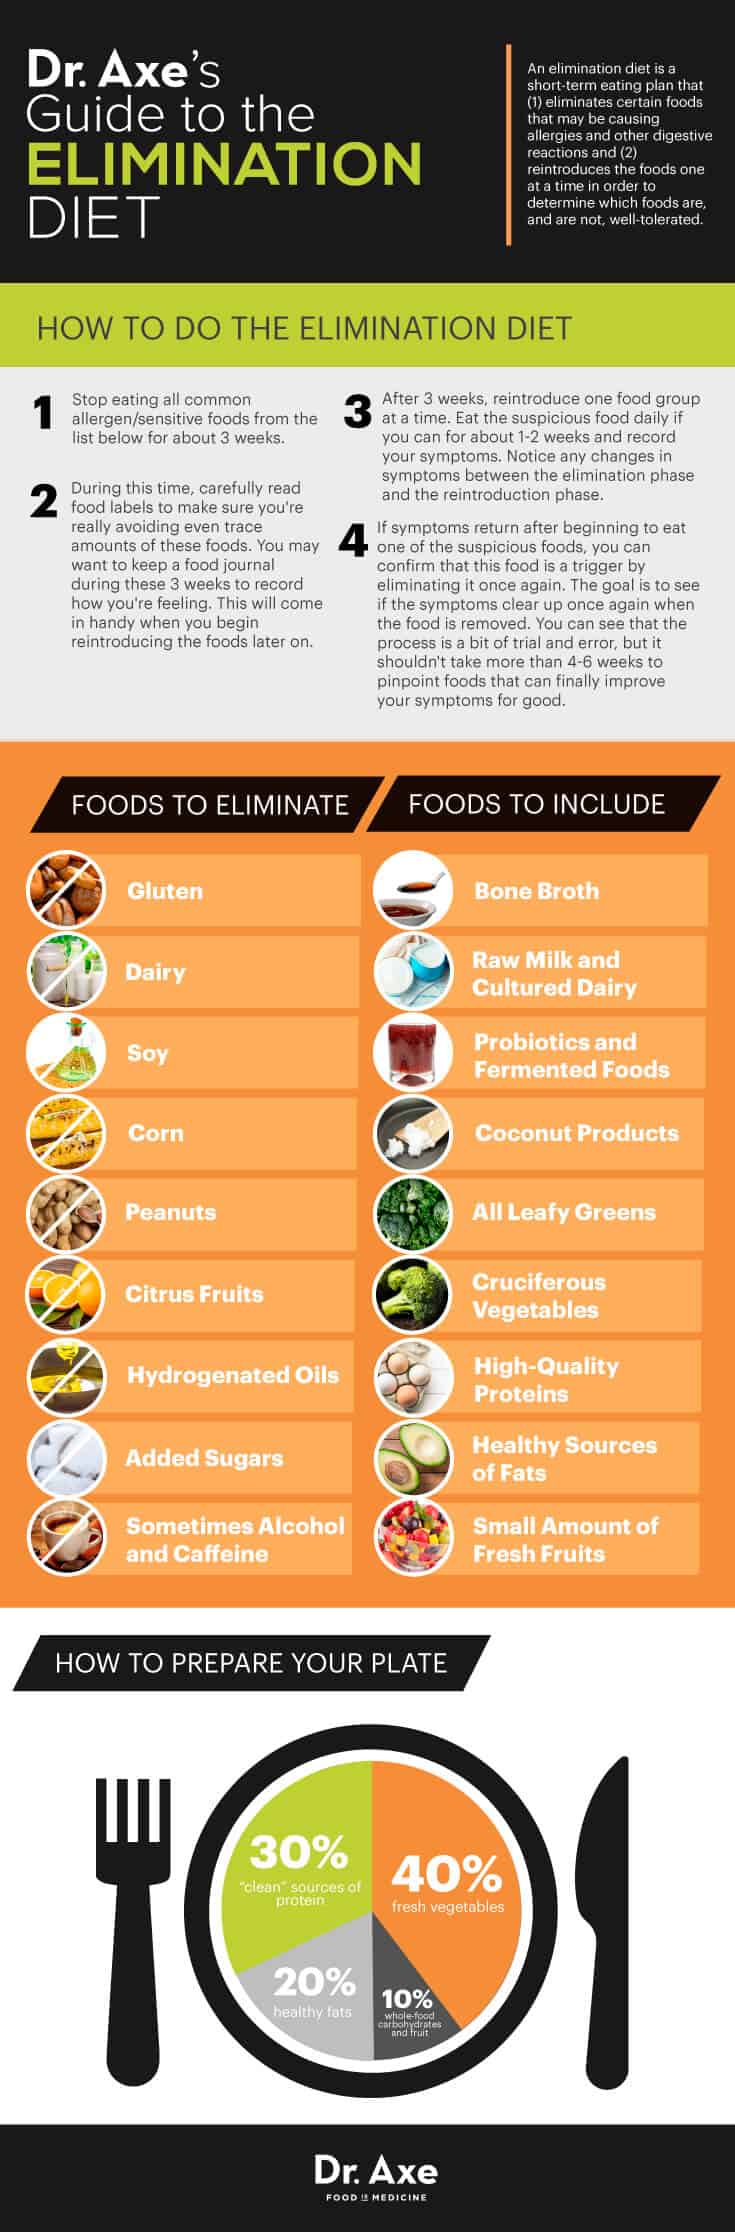 8 food elimination diet recipes How To Do An Elimination Diet Benefits Foods To Remove Plan Dr Axe